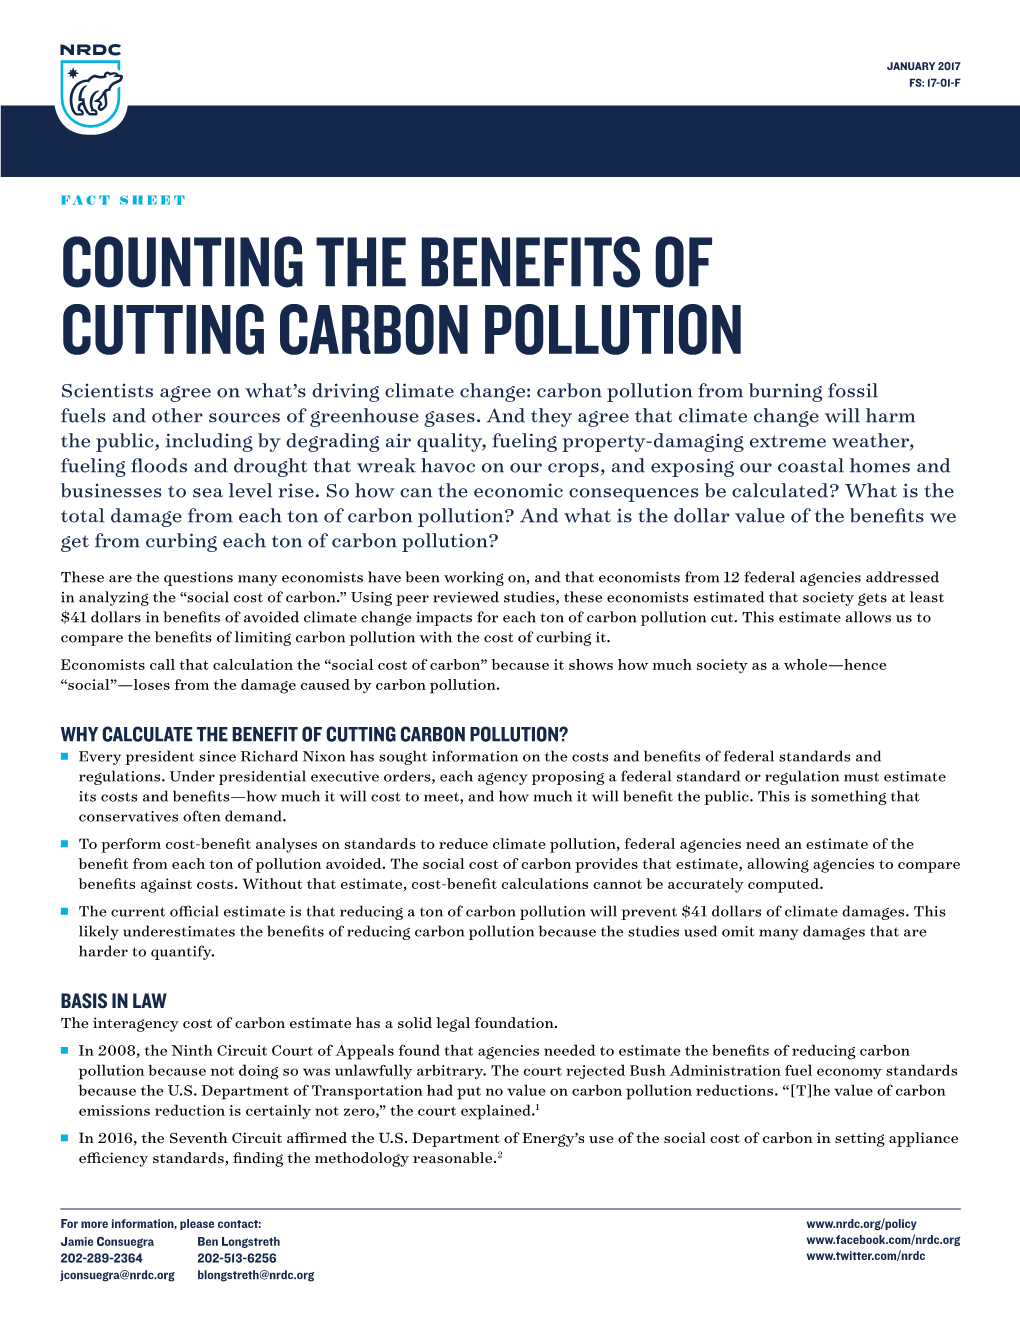 Social Cost of Carbon